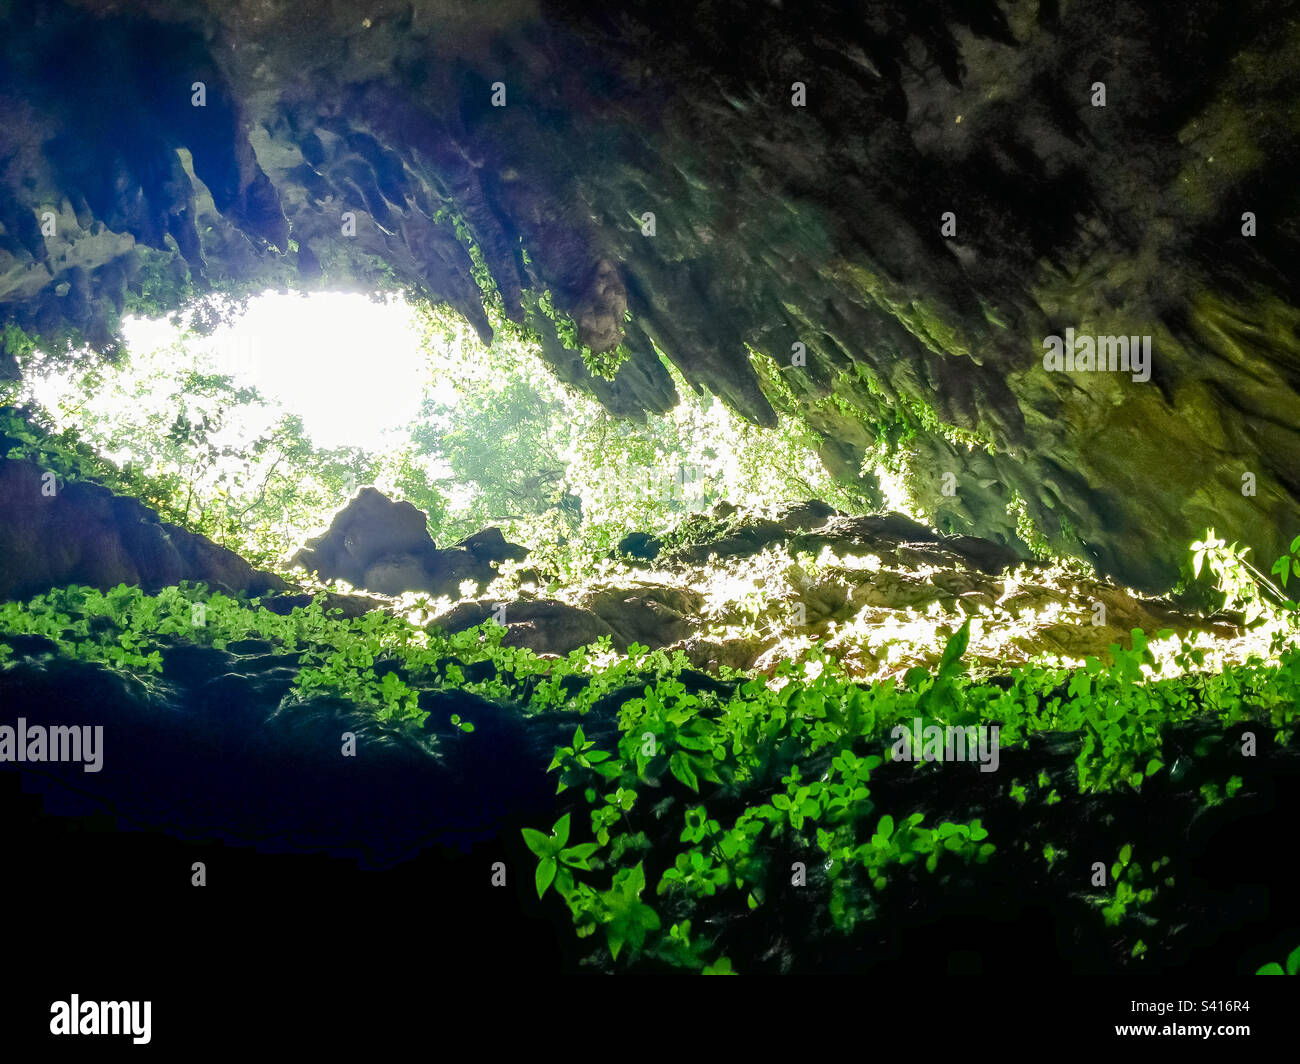 Inside the Cavernas del Río Camuy National Park cave. Stock Photo